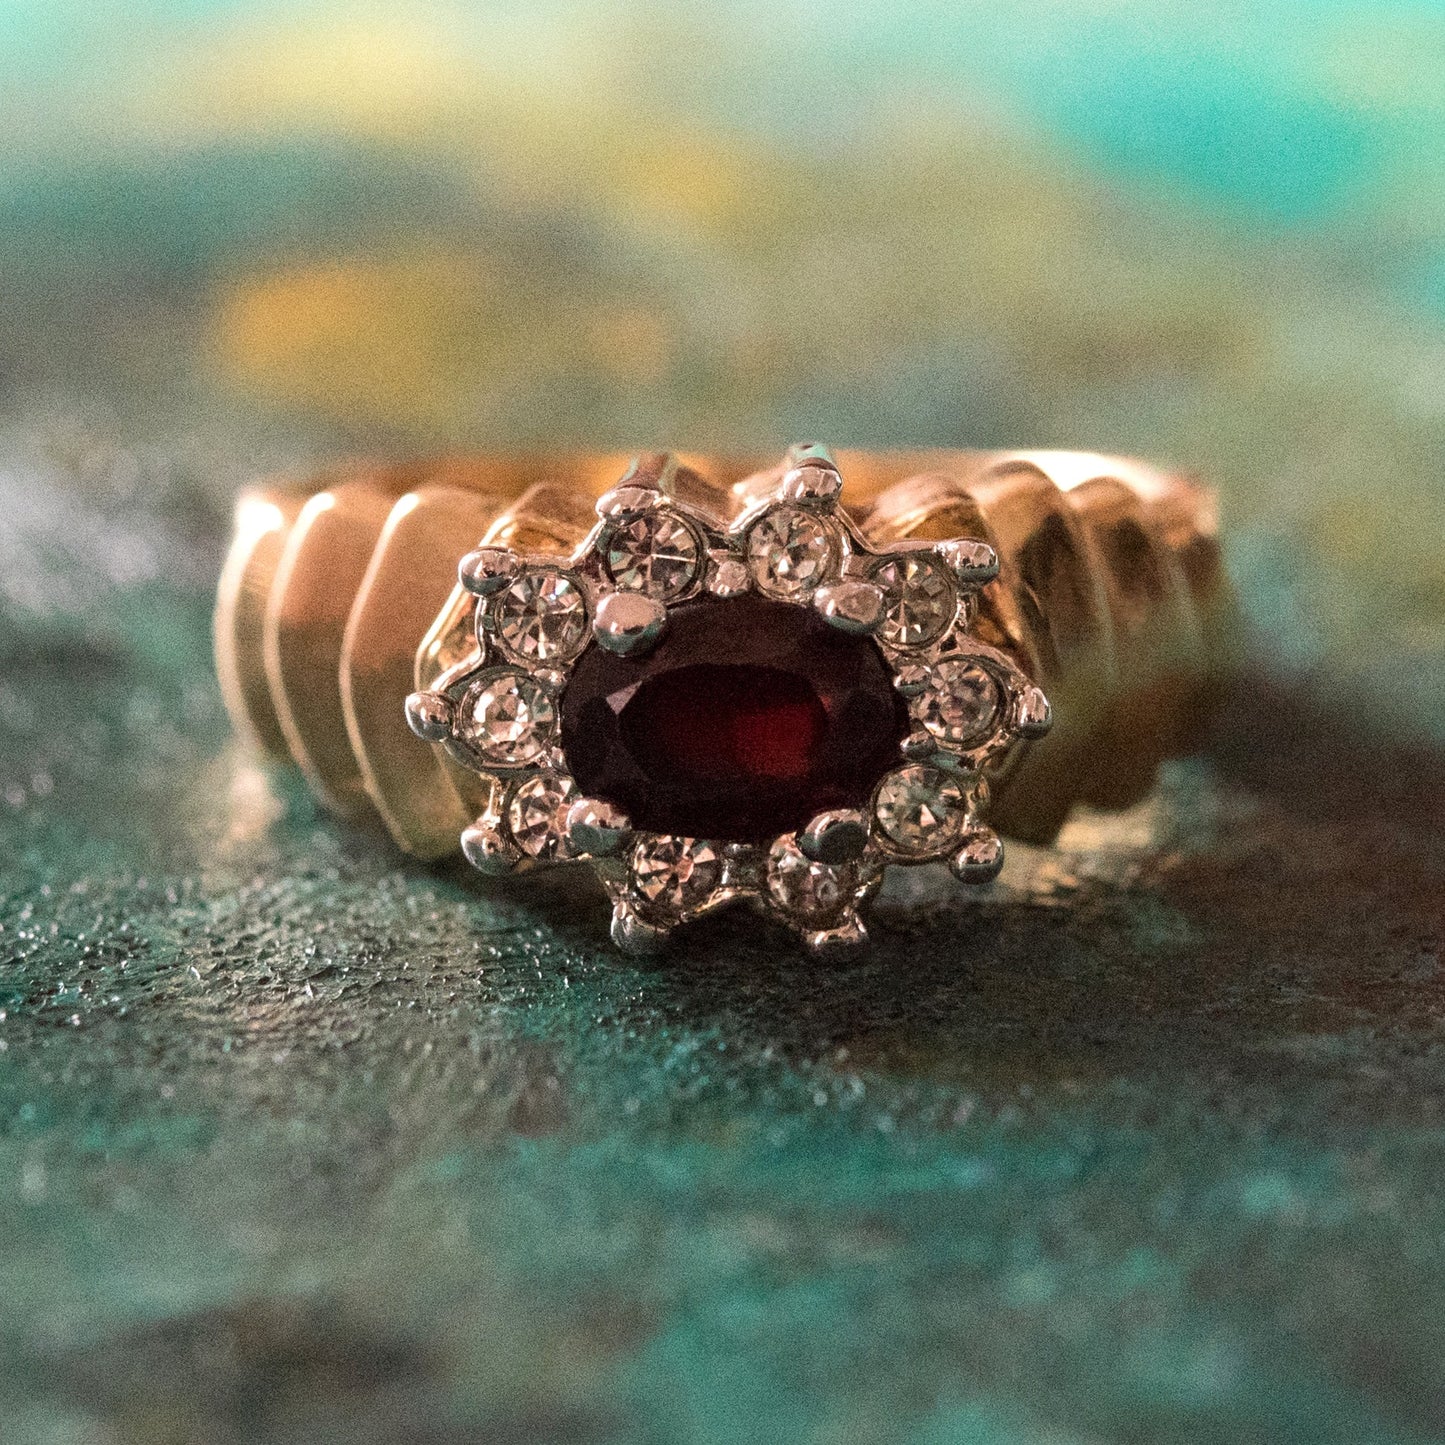 Vintage Ring Genuine Garnet and Clear Swarovski Crystals 18kt Gold Plated Band January Birthstone R2950 Size: 10